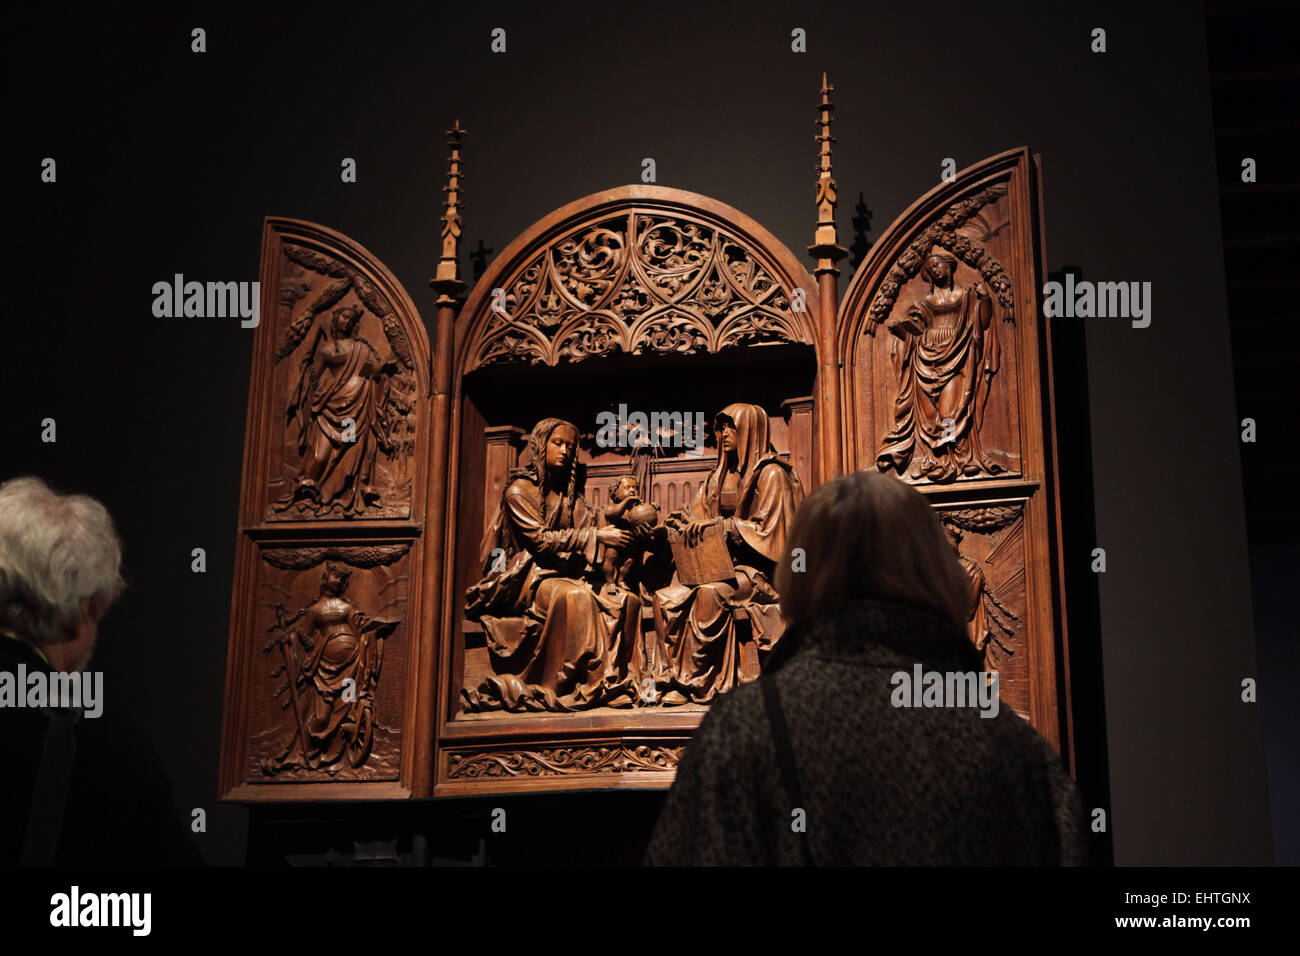 Altar of Saint Anne. Wooden carved altar by Master IP, circa 1524. Chateau Cesky Krumlov, Czech Republic. Exhibition 'Castles and Chateaux: Rediscovered and Celebrated' at the Prague Castle Riding School in Prague, Czech Republic. Stock Photo